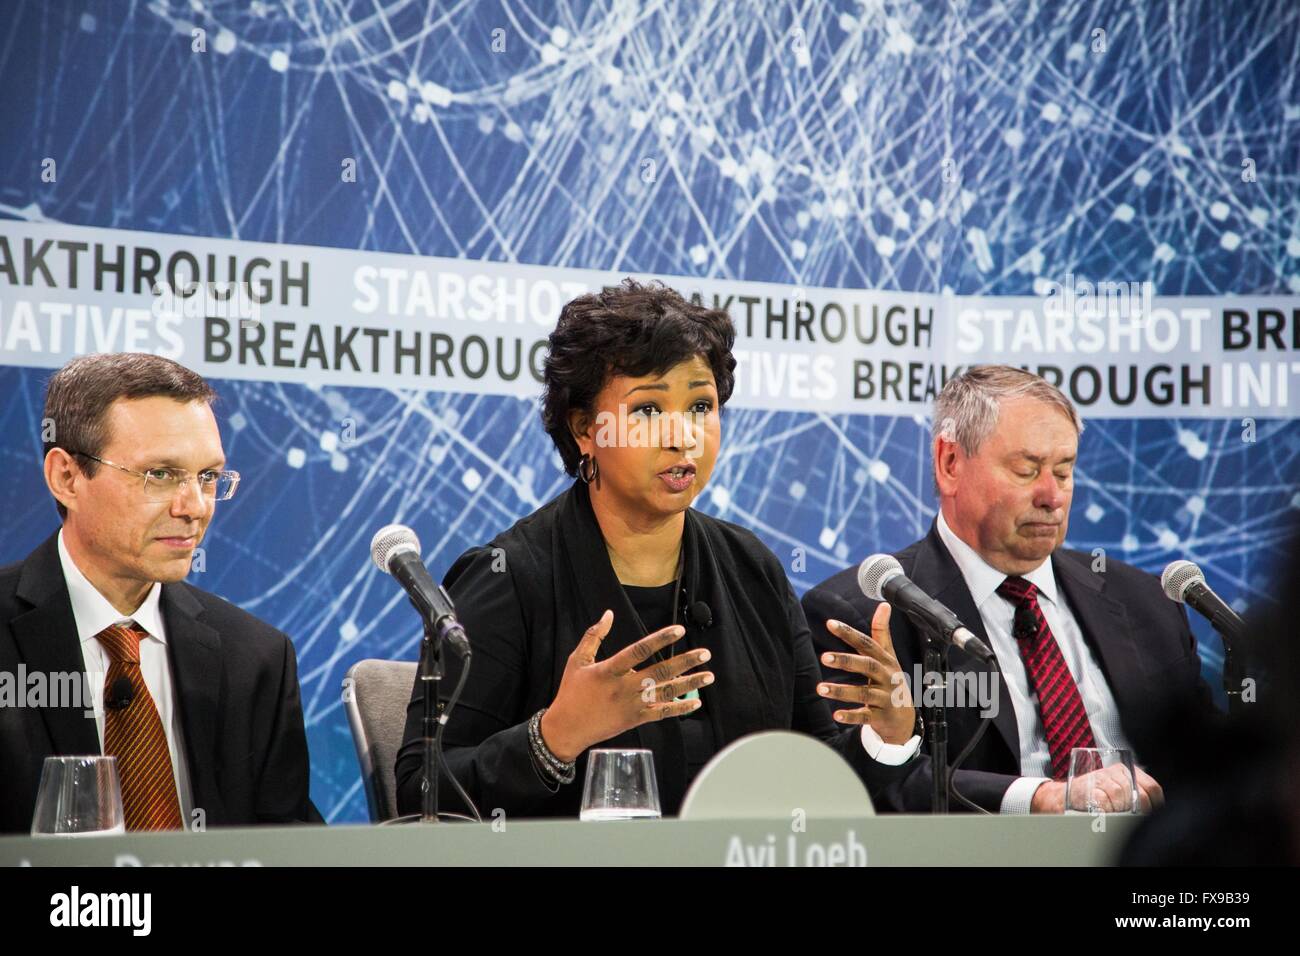 New York, USA. 12th Apr, 2016. NASA astronaut Mae Jemison (C) speaks at the "StarShot" project press conference at One World Observatory in New York, the United States, April 12, 2016. British astrophysicist Stephen Hawking announced here Tuesday he is teaming up with Russian billionaire Yuri Milner and a group of scientists for a new "Starshot" space exploration program, which will build tiny spacecraft called "nanocraft" capable of reaching the Alpha Centauri star system in approximately 20 years after launch. Credit:  Li Changxiang/Xinhua/Alamy Live News Stock Photo